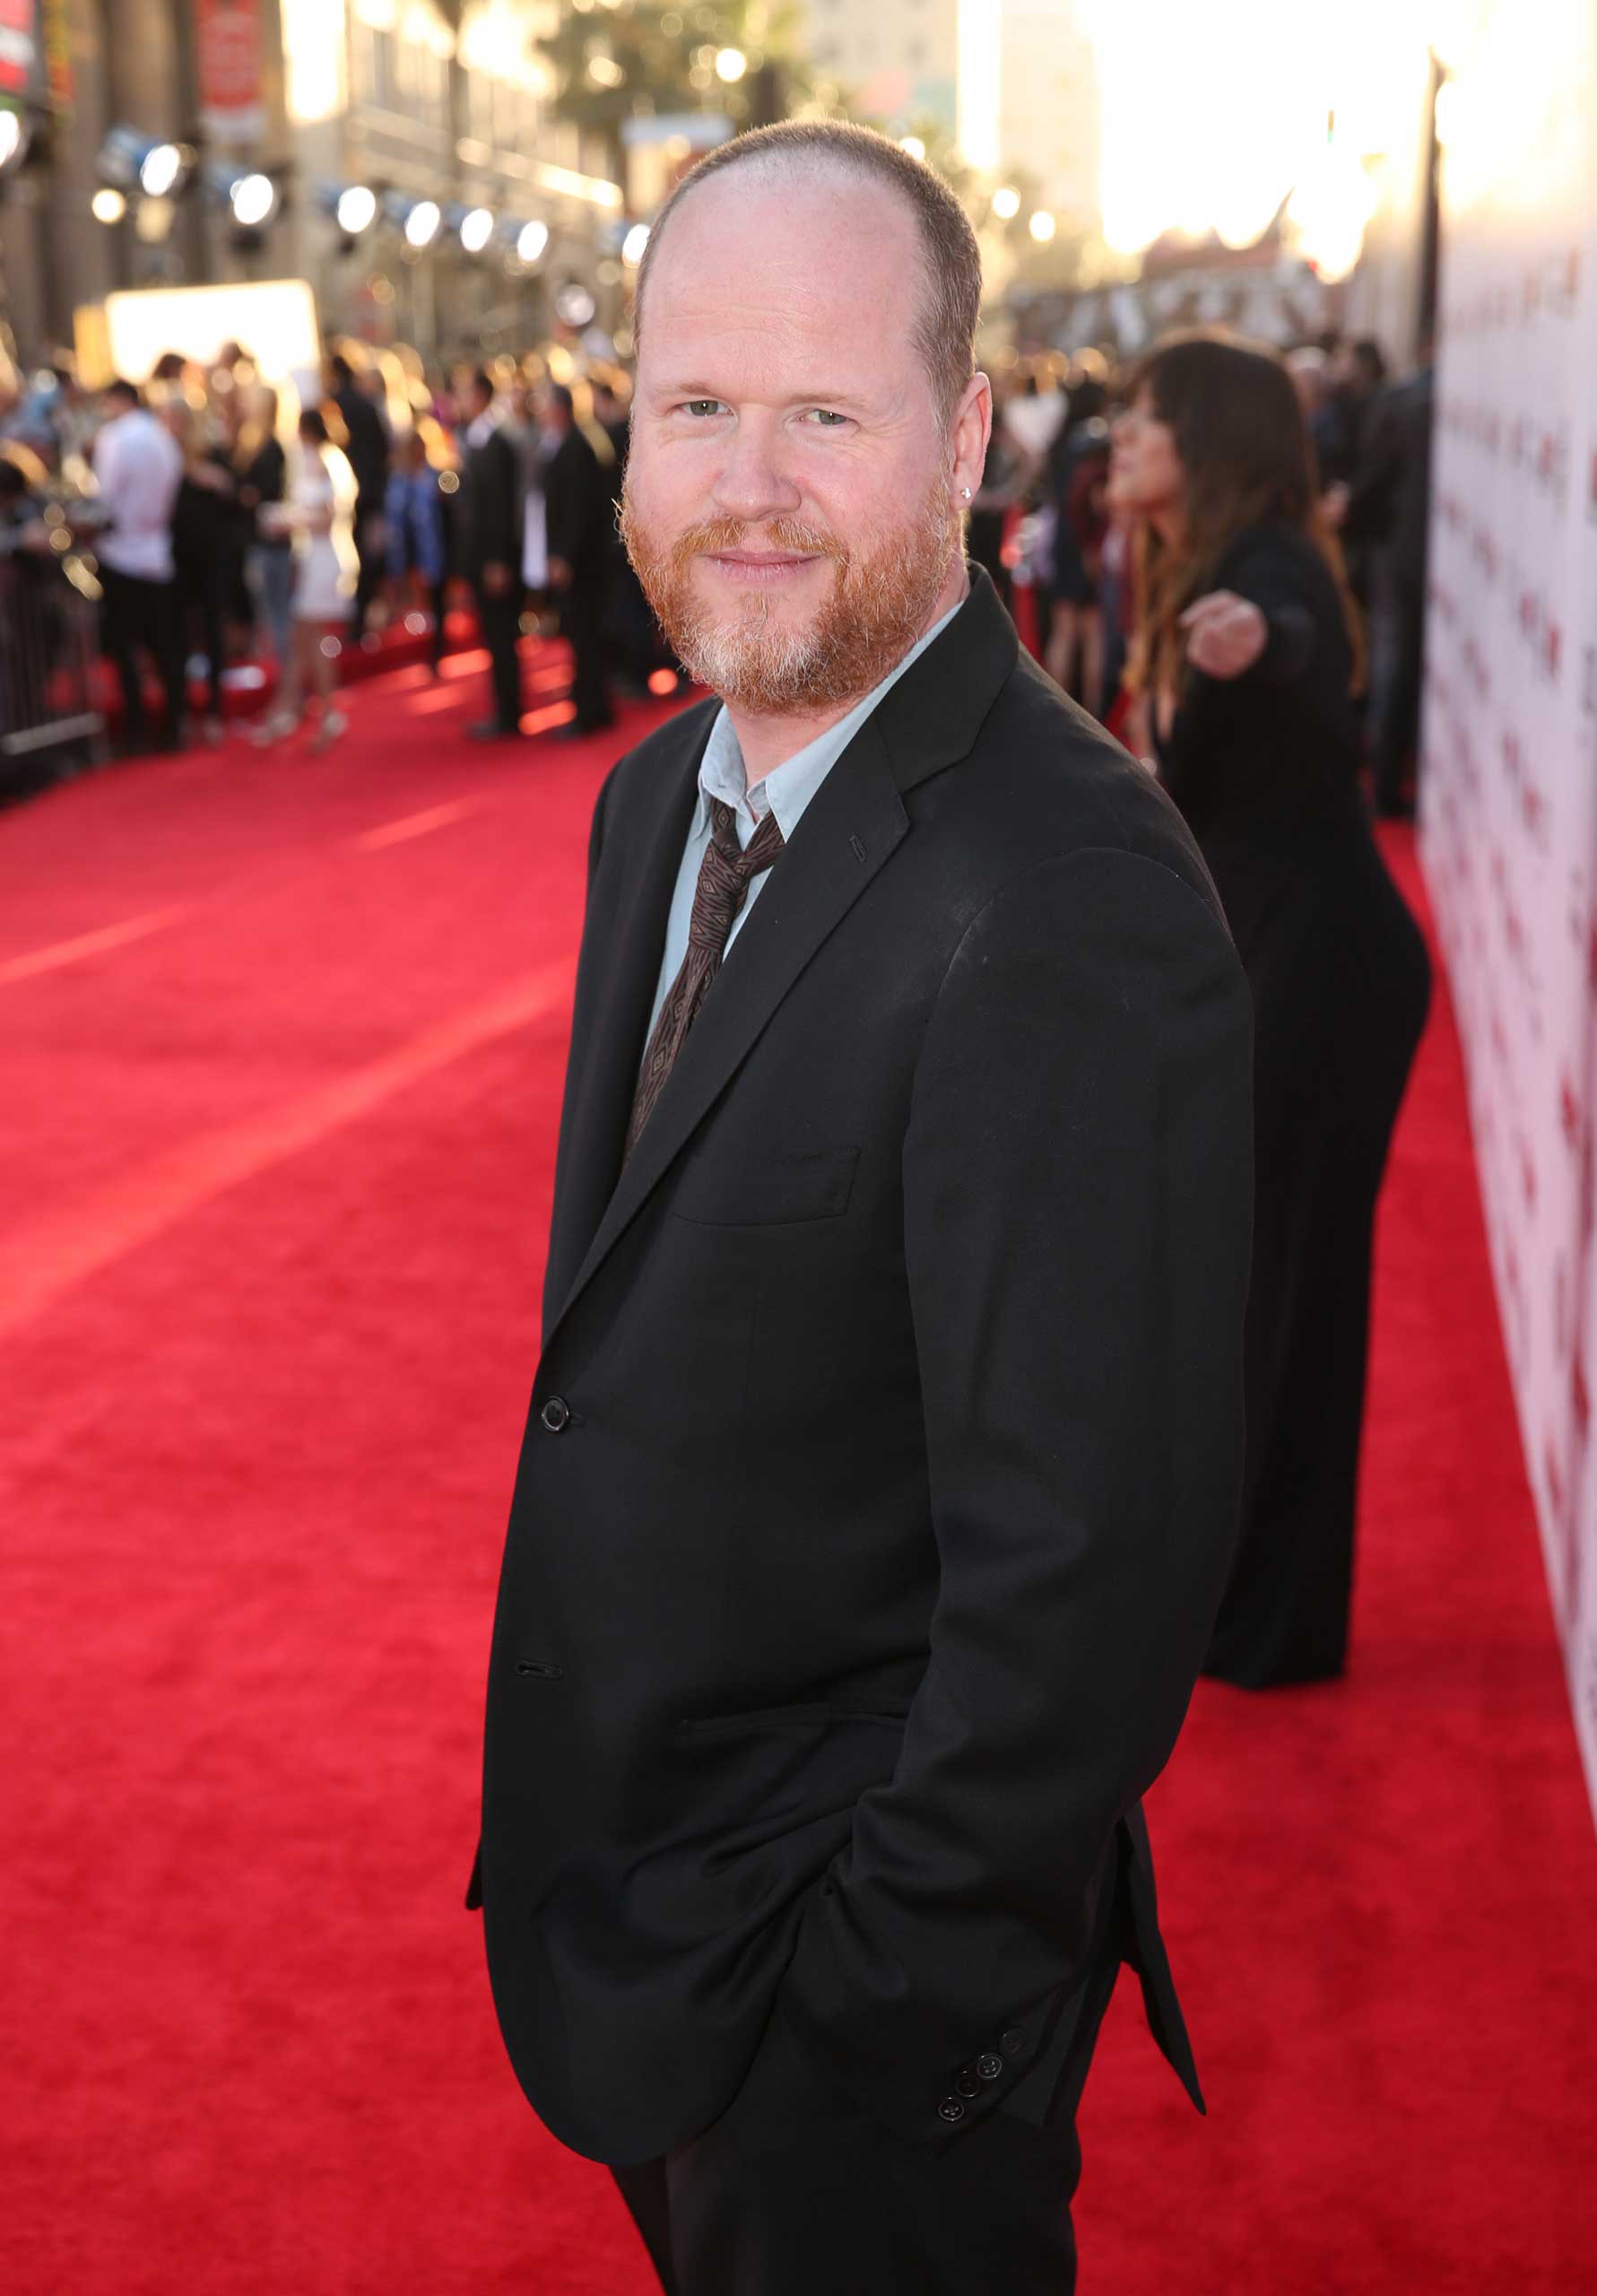 Joss Whedon arrives at the Los Angeles premiere of "Avengers: Age Of Ultron" at the Dolby Theatre on April 13, 2015. (Matt Sayles—Invision/AP)